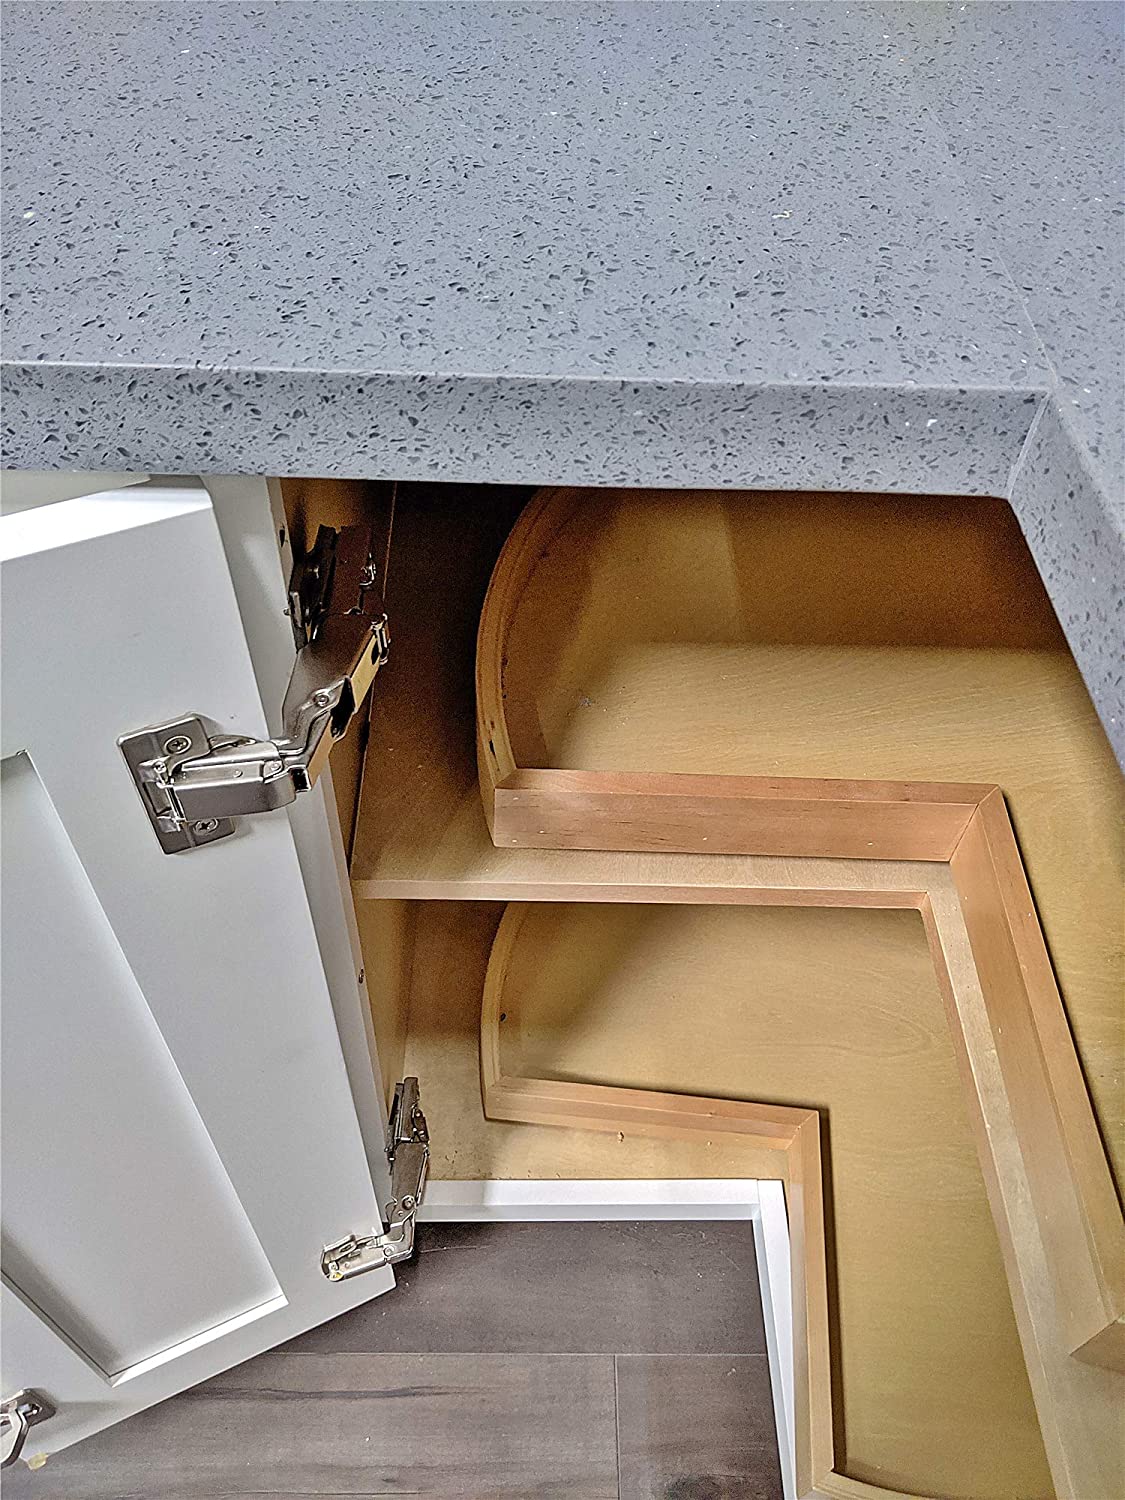 How To Adjust Hinges On Cabinet Doors